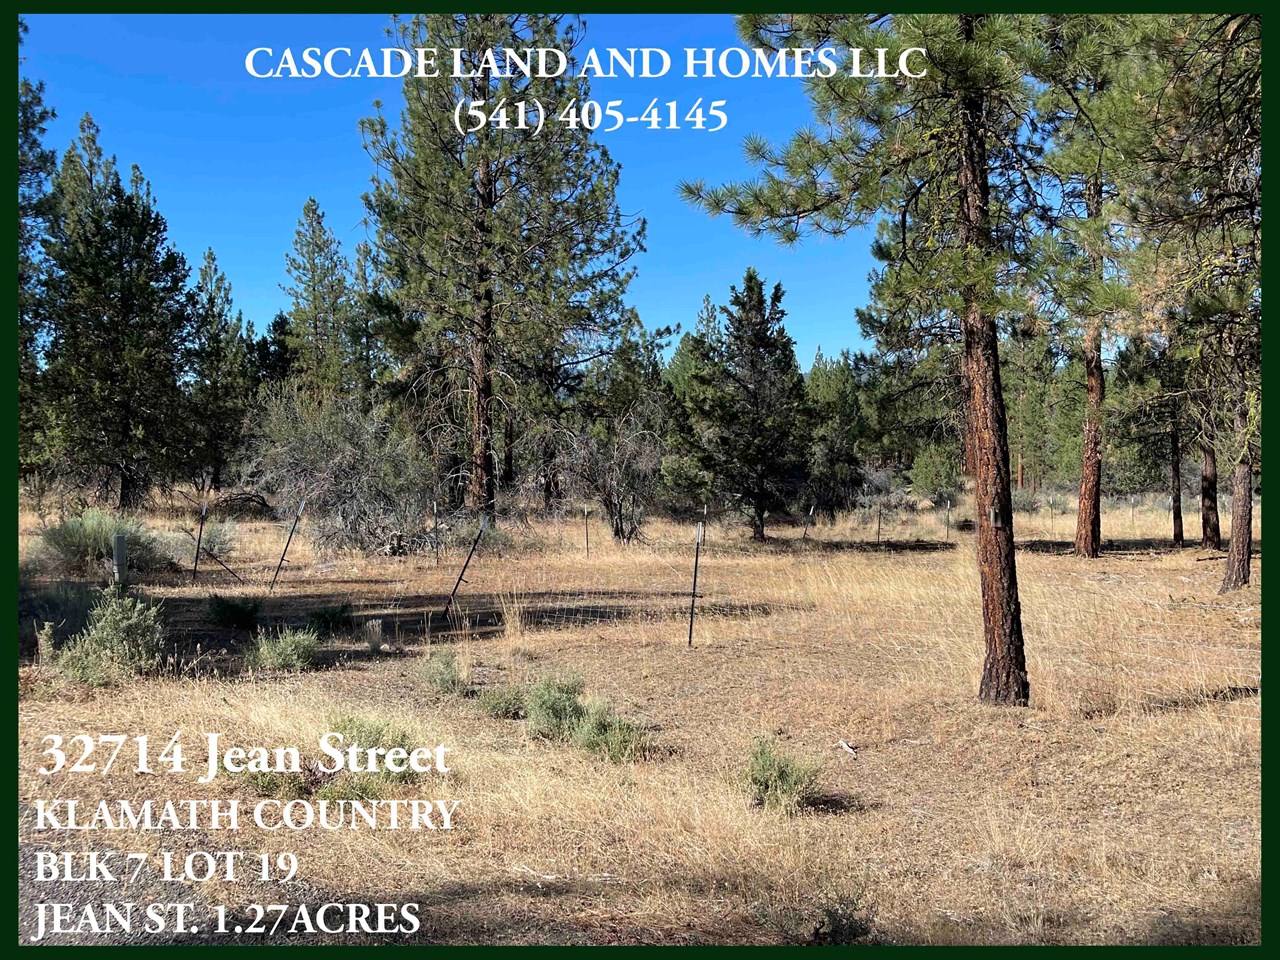 this property is centrally located where it would be an easy drive for so many recreational activities, there is something for everyone here! with the tall pine trees and fresh air, you may just want to stay home and enjoy your new home, so bring your house plans!